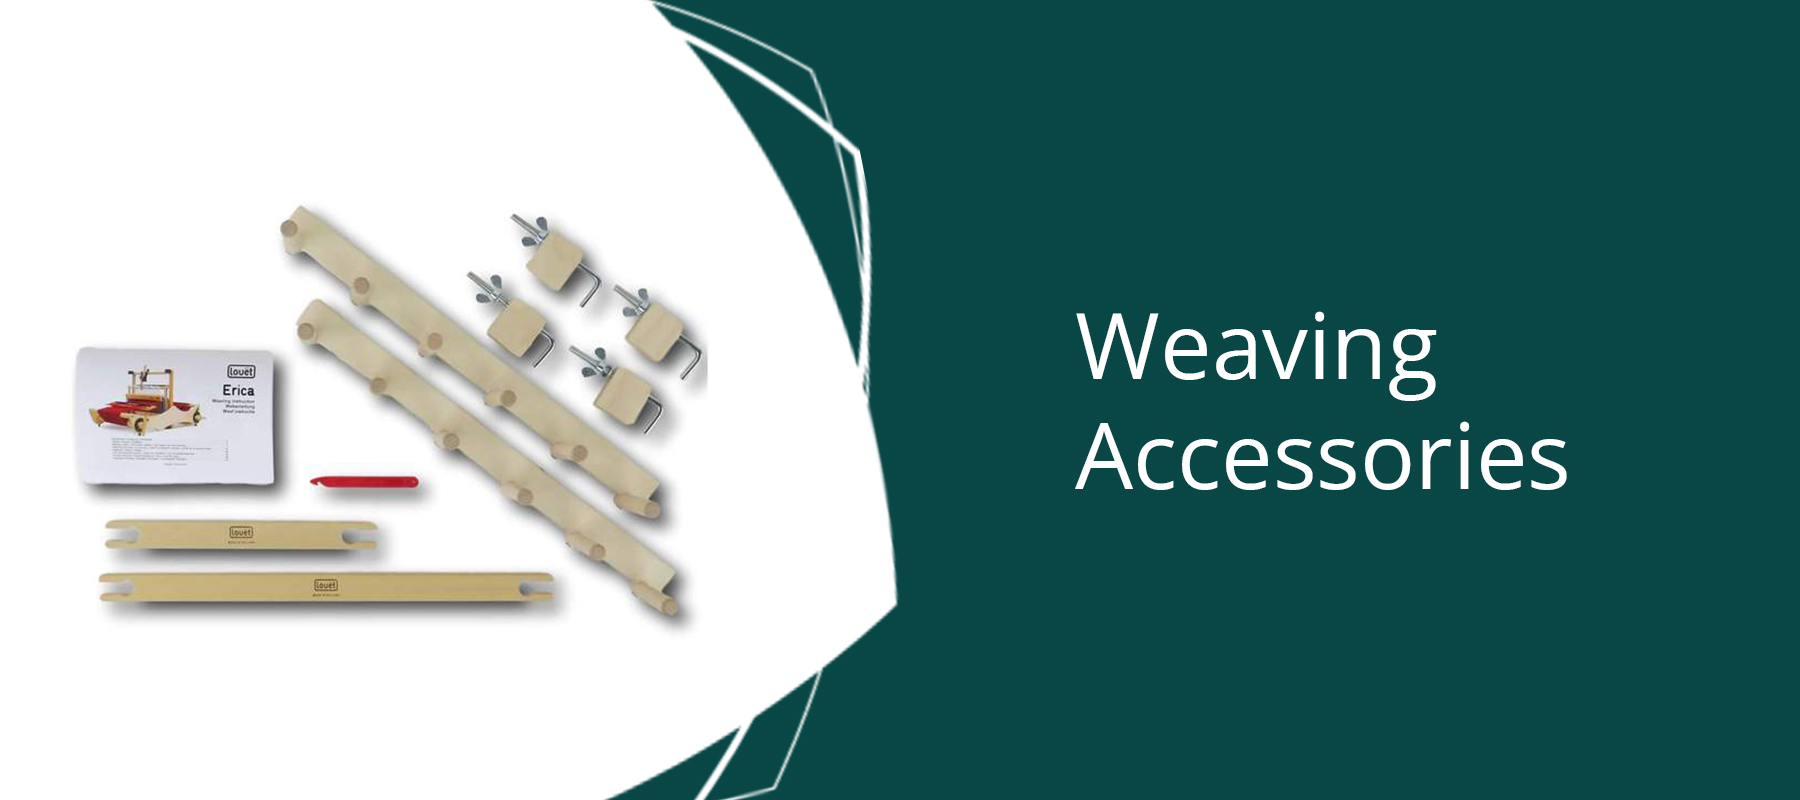 Weaving Tools, Supplies, and Accessories